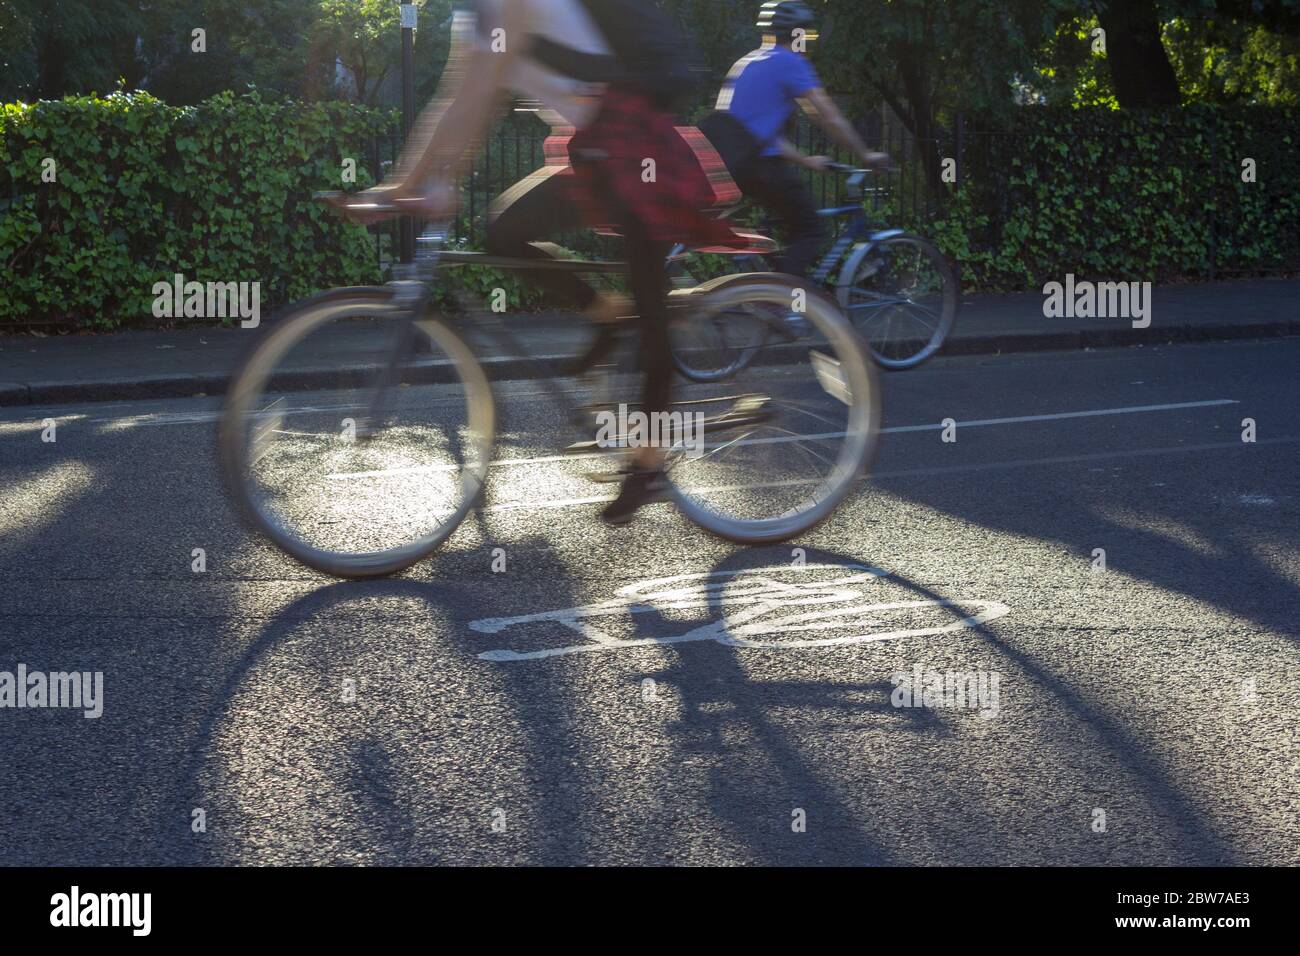 Two cyclists pass each other on a quiet cycle route marked by the bicycle stencil on the road. It is evening and the cyclists cast long shadows. Stock Photo